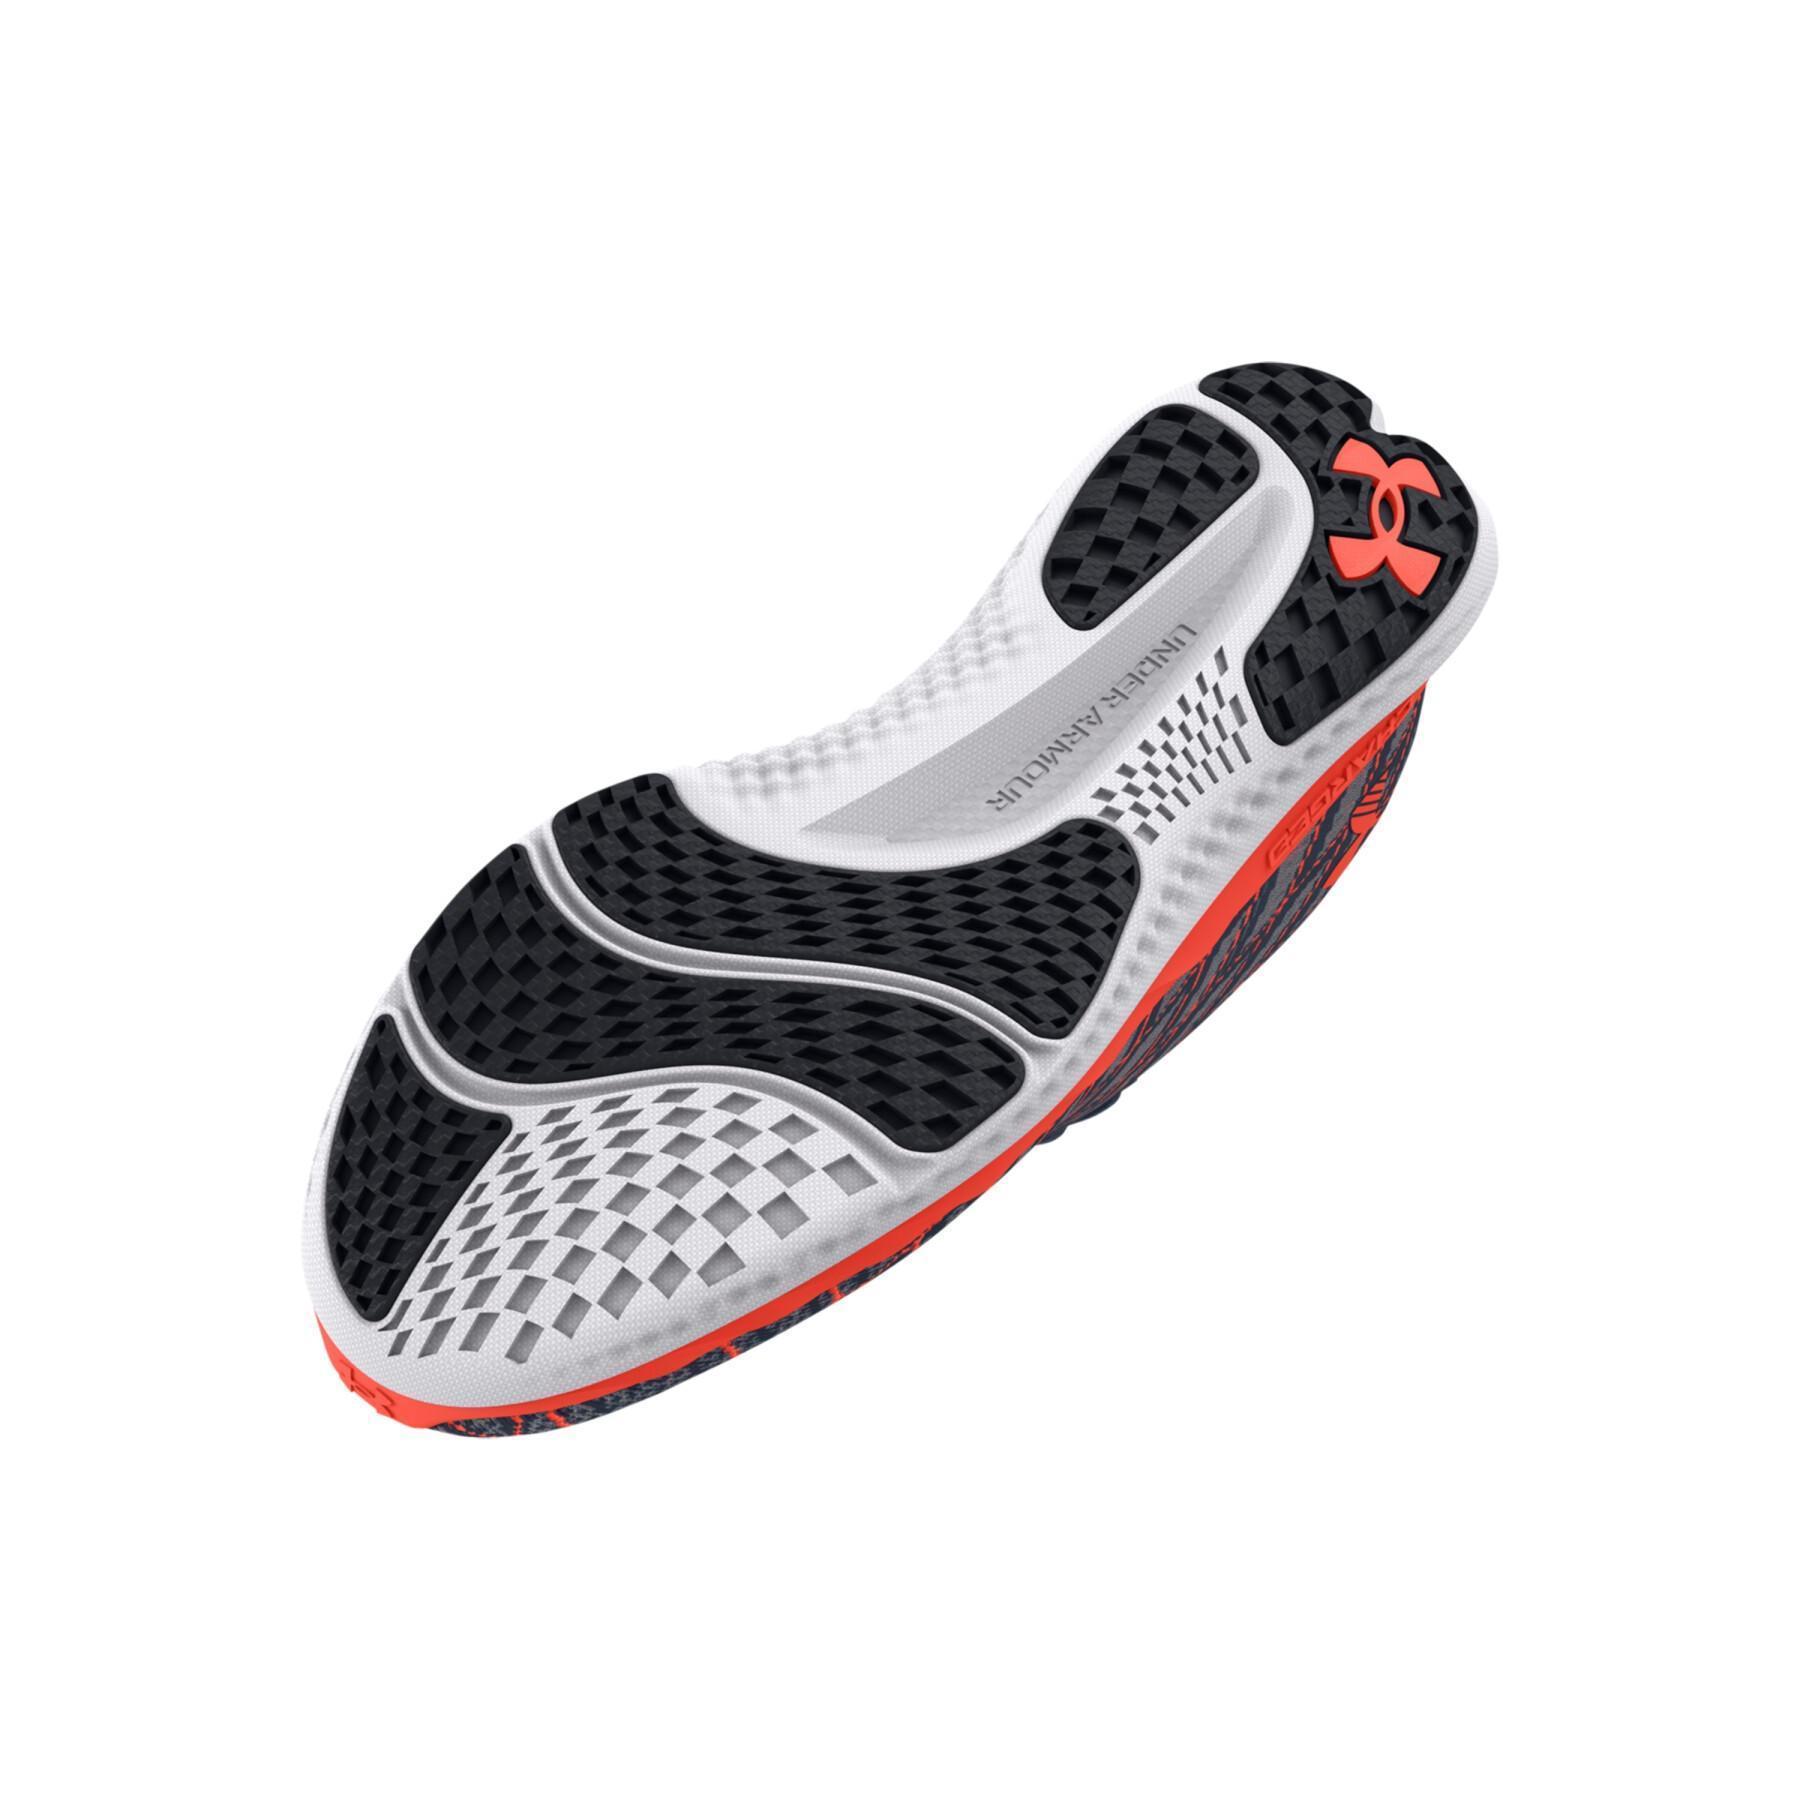 Sapatos de running Under Armour Charged Breeze 2